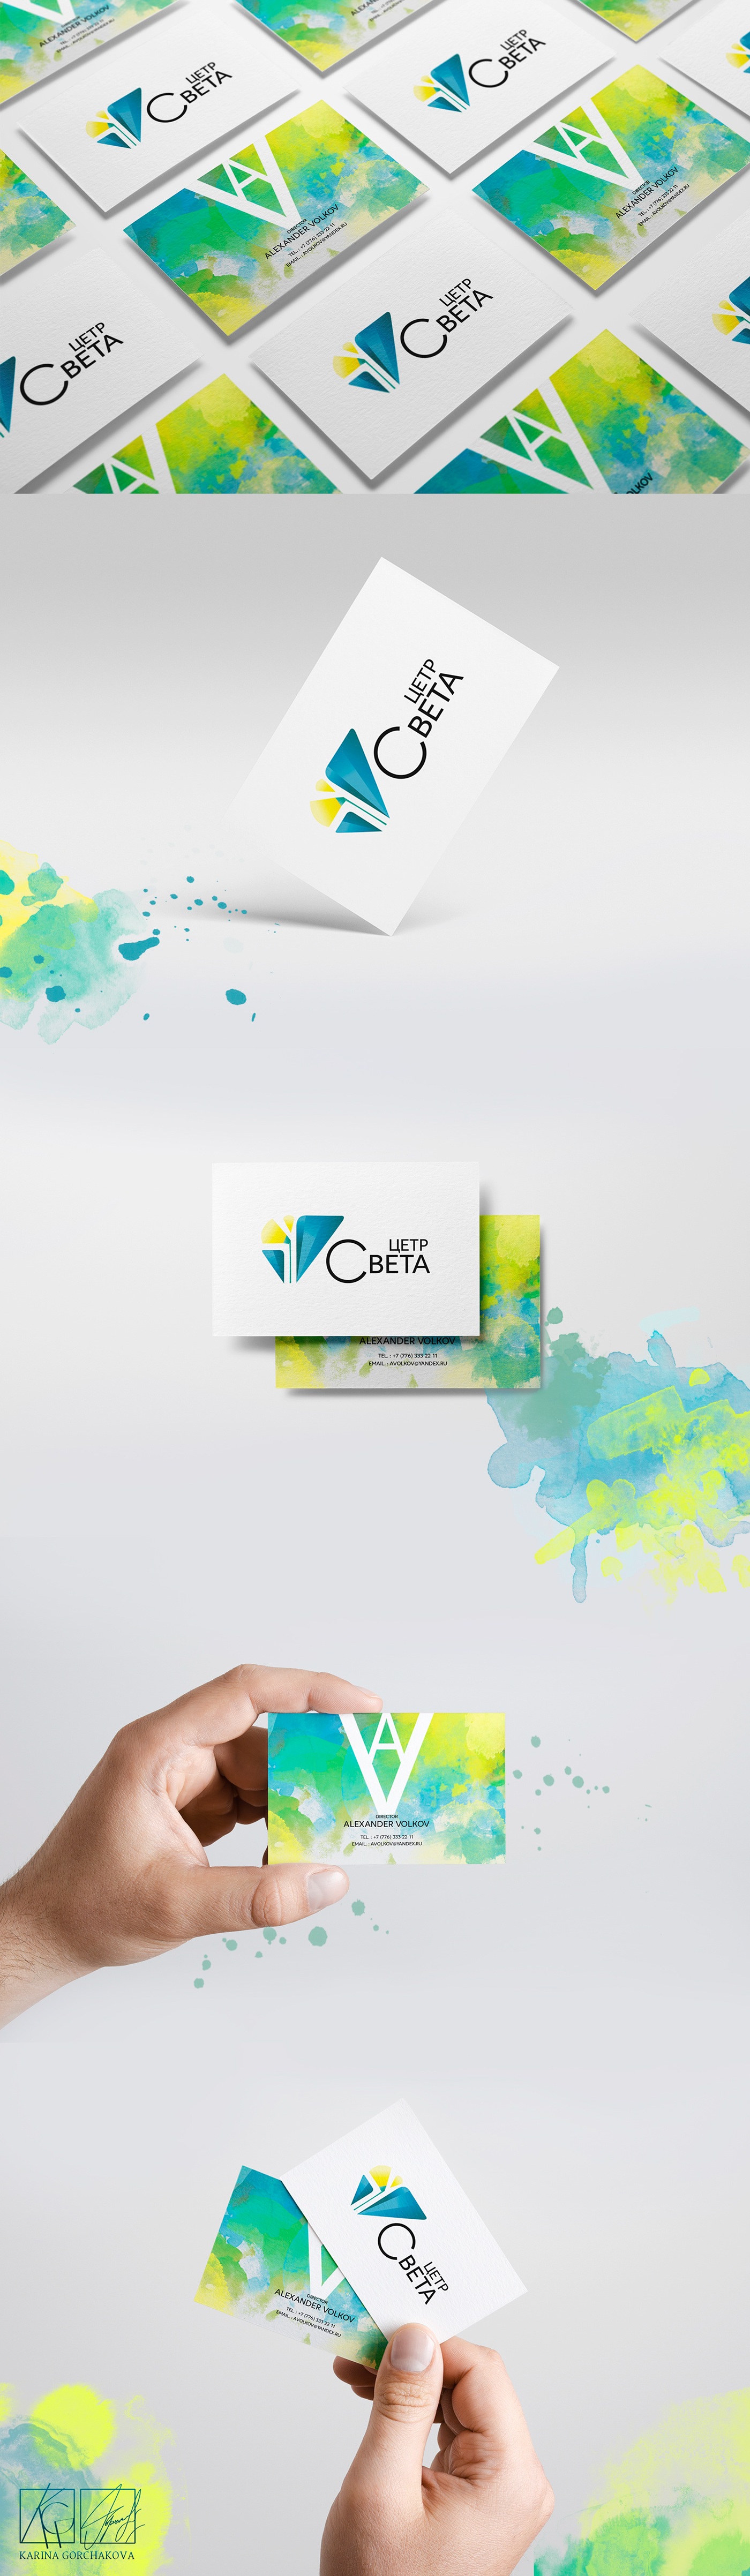 #Branding #Design #graphicDesign # Business #Identity #color businesscard